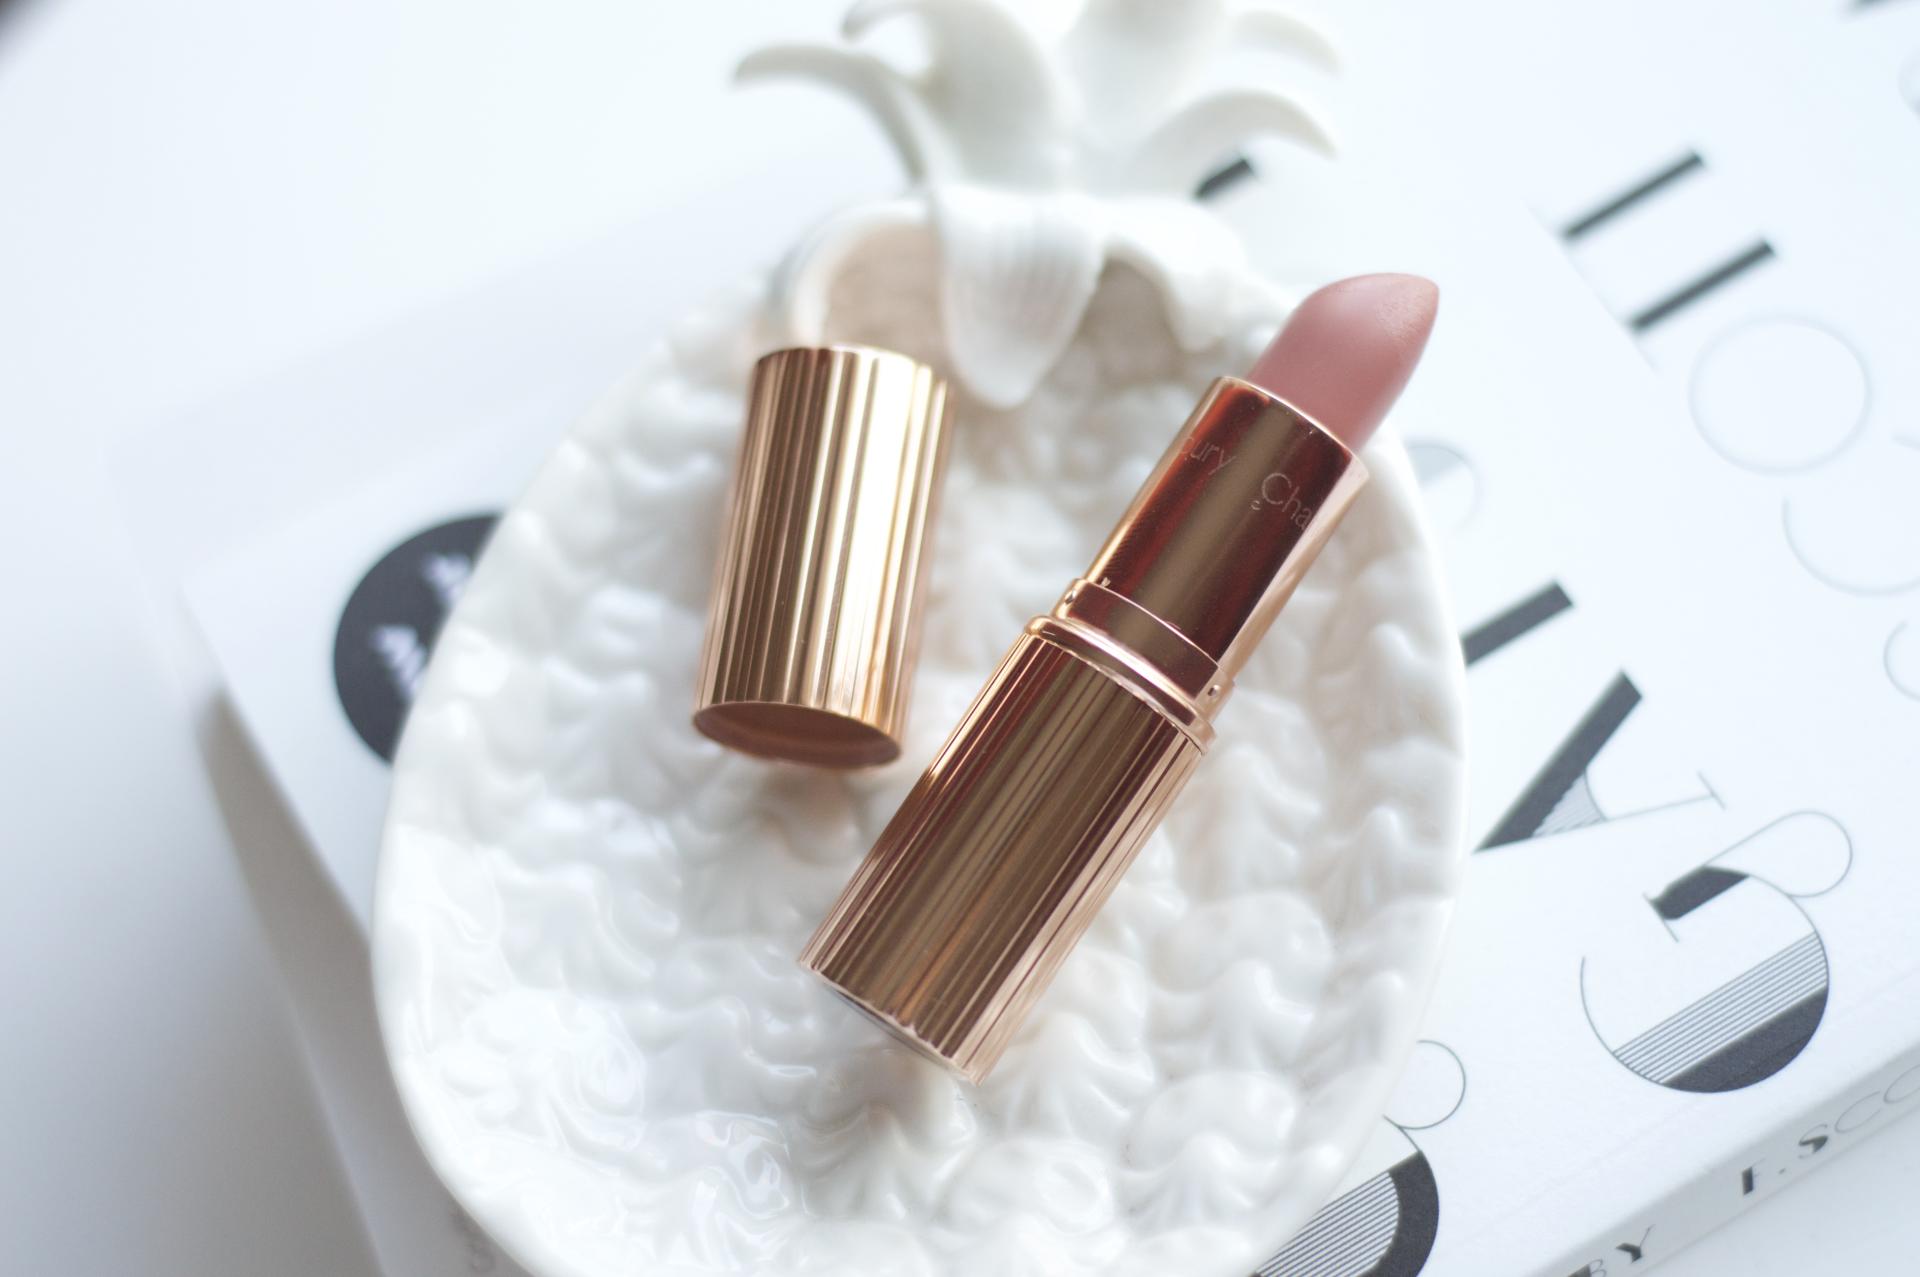 Made From Beauty Charlotte Tilbury K.I.S.S.I.N.G Lipstick in Bitch Perfect Flat